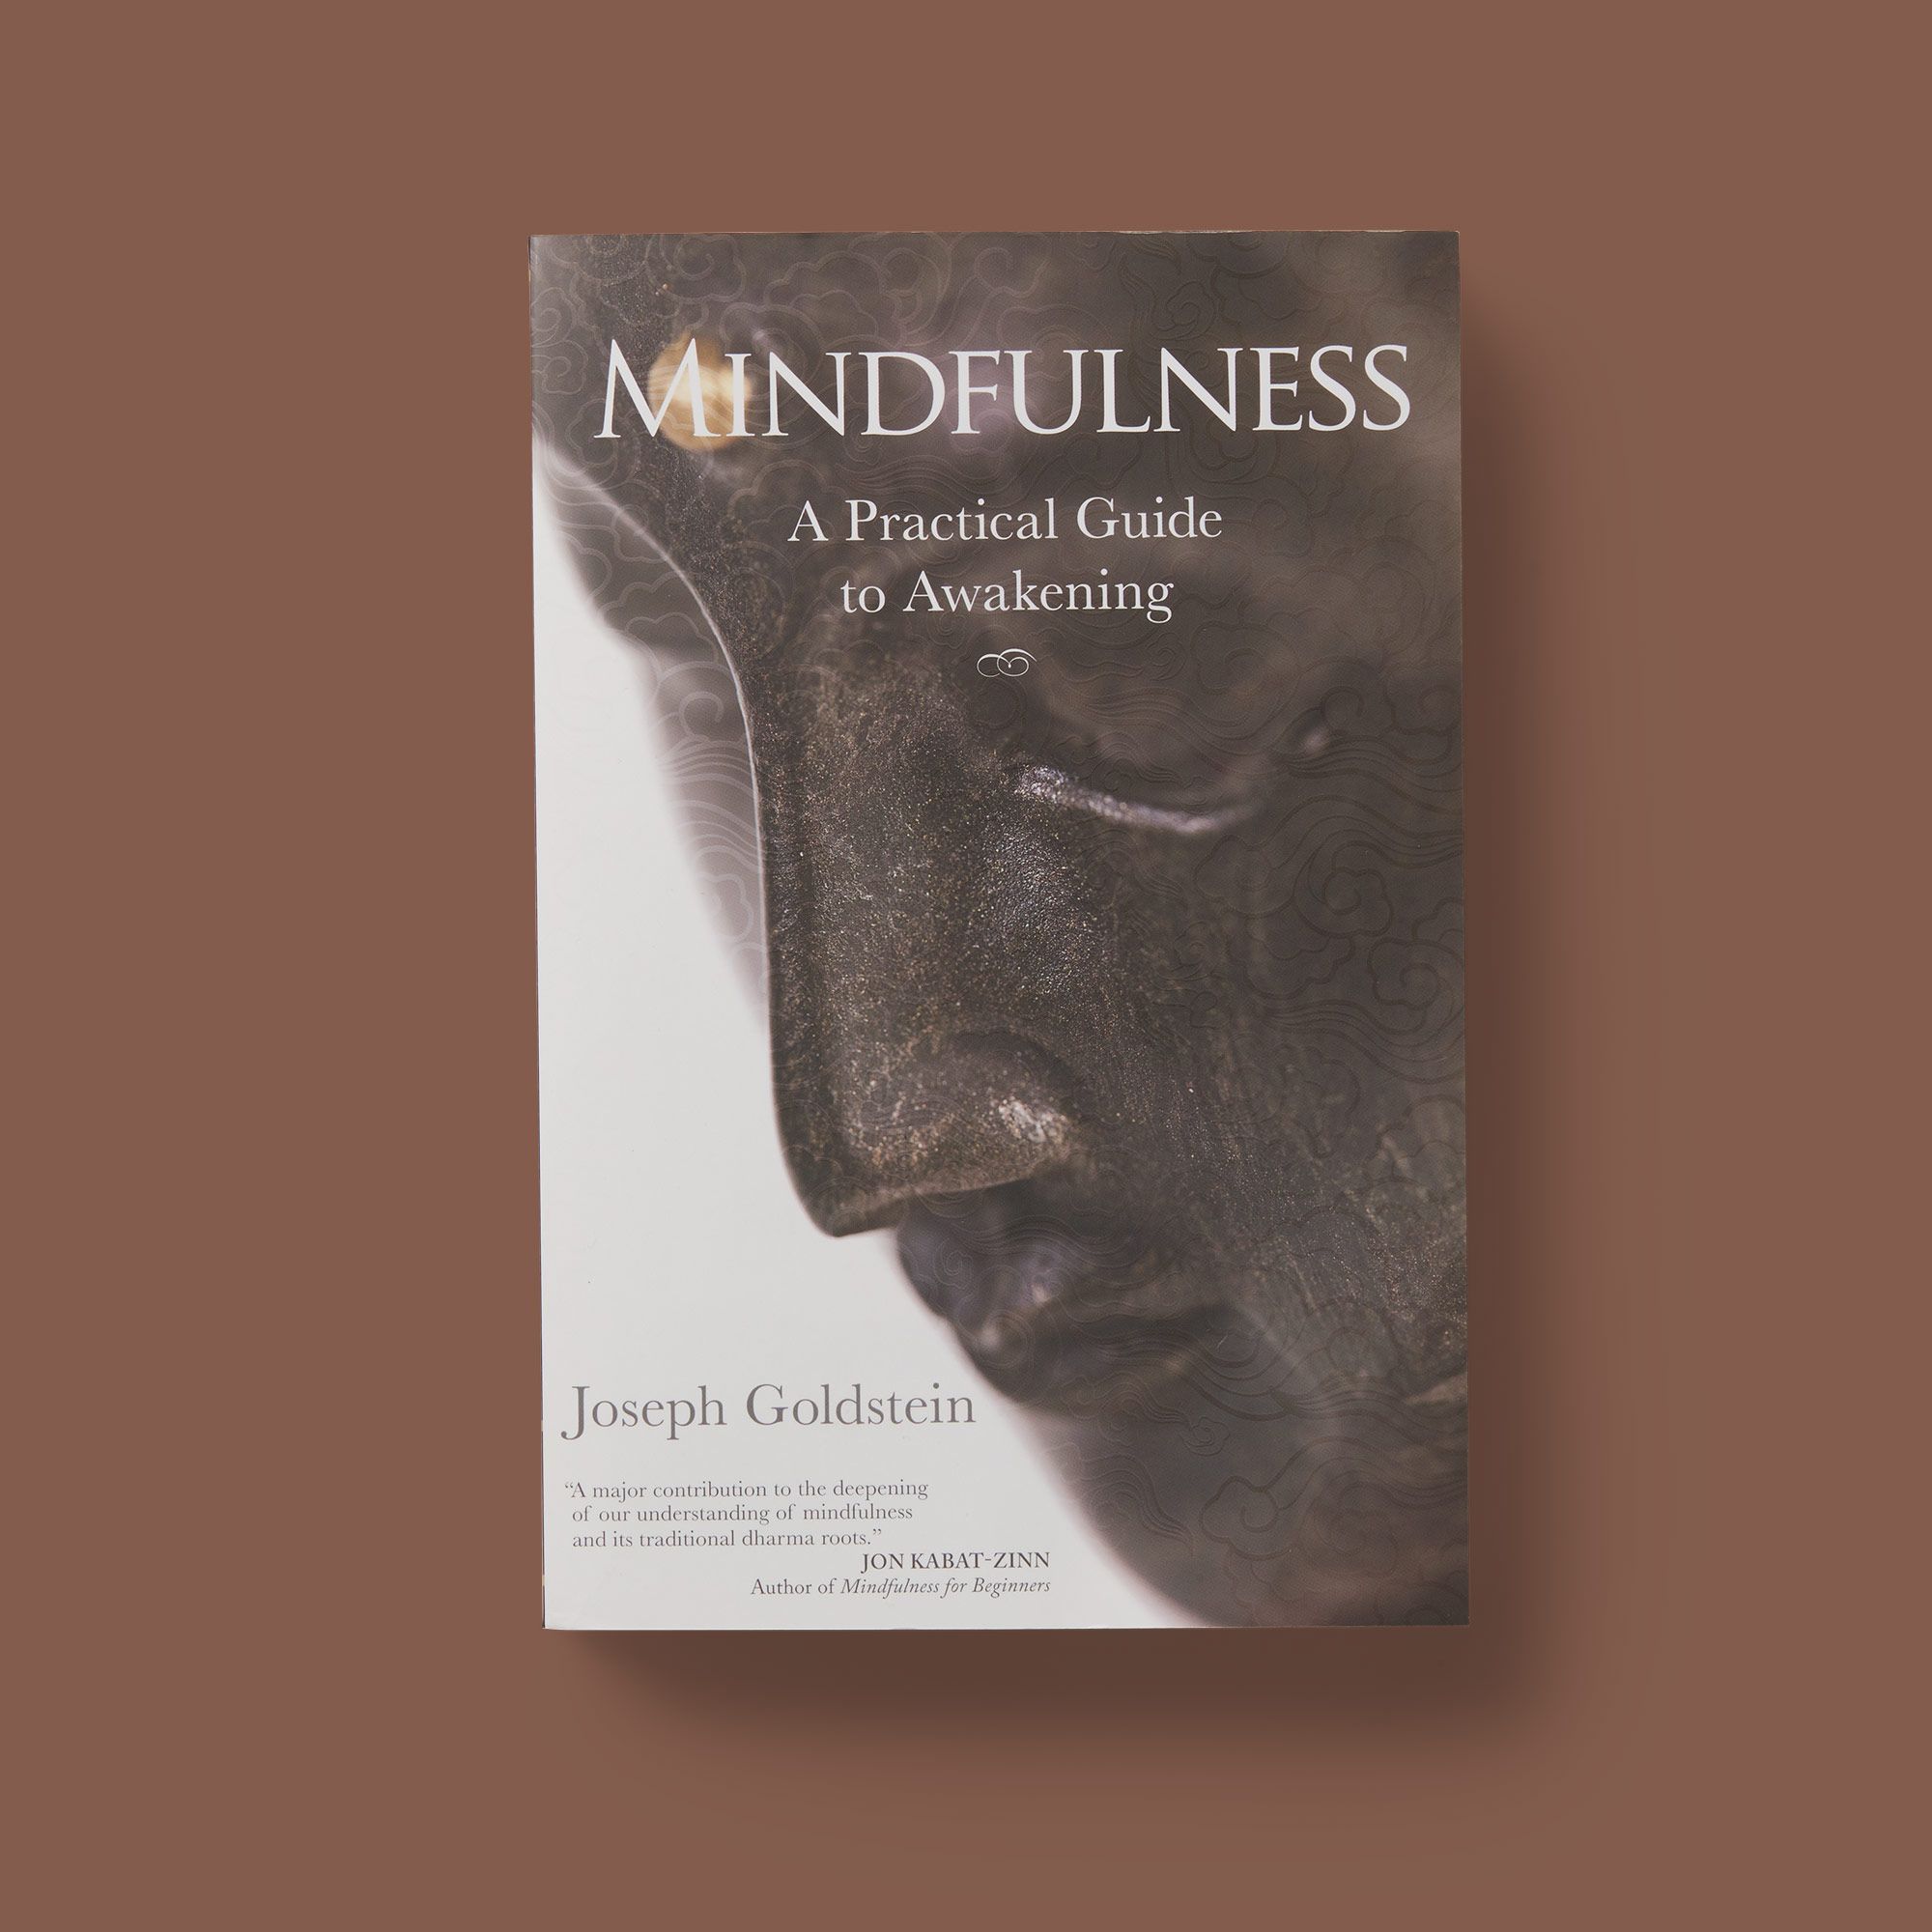 Mindfulness: A Practical Guide to Awakening [Book]